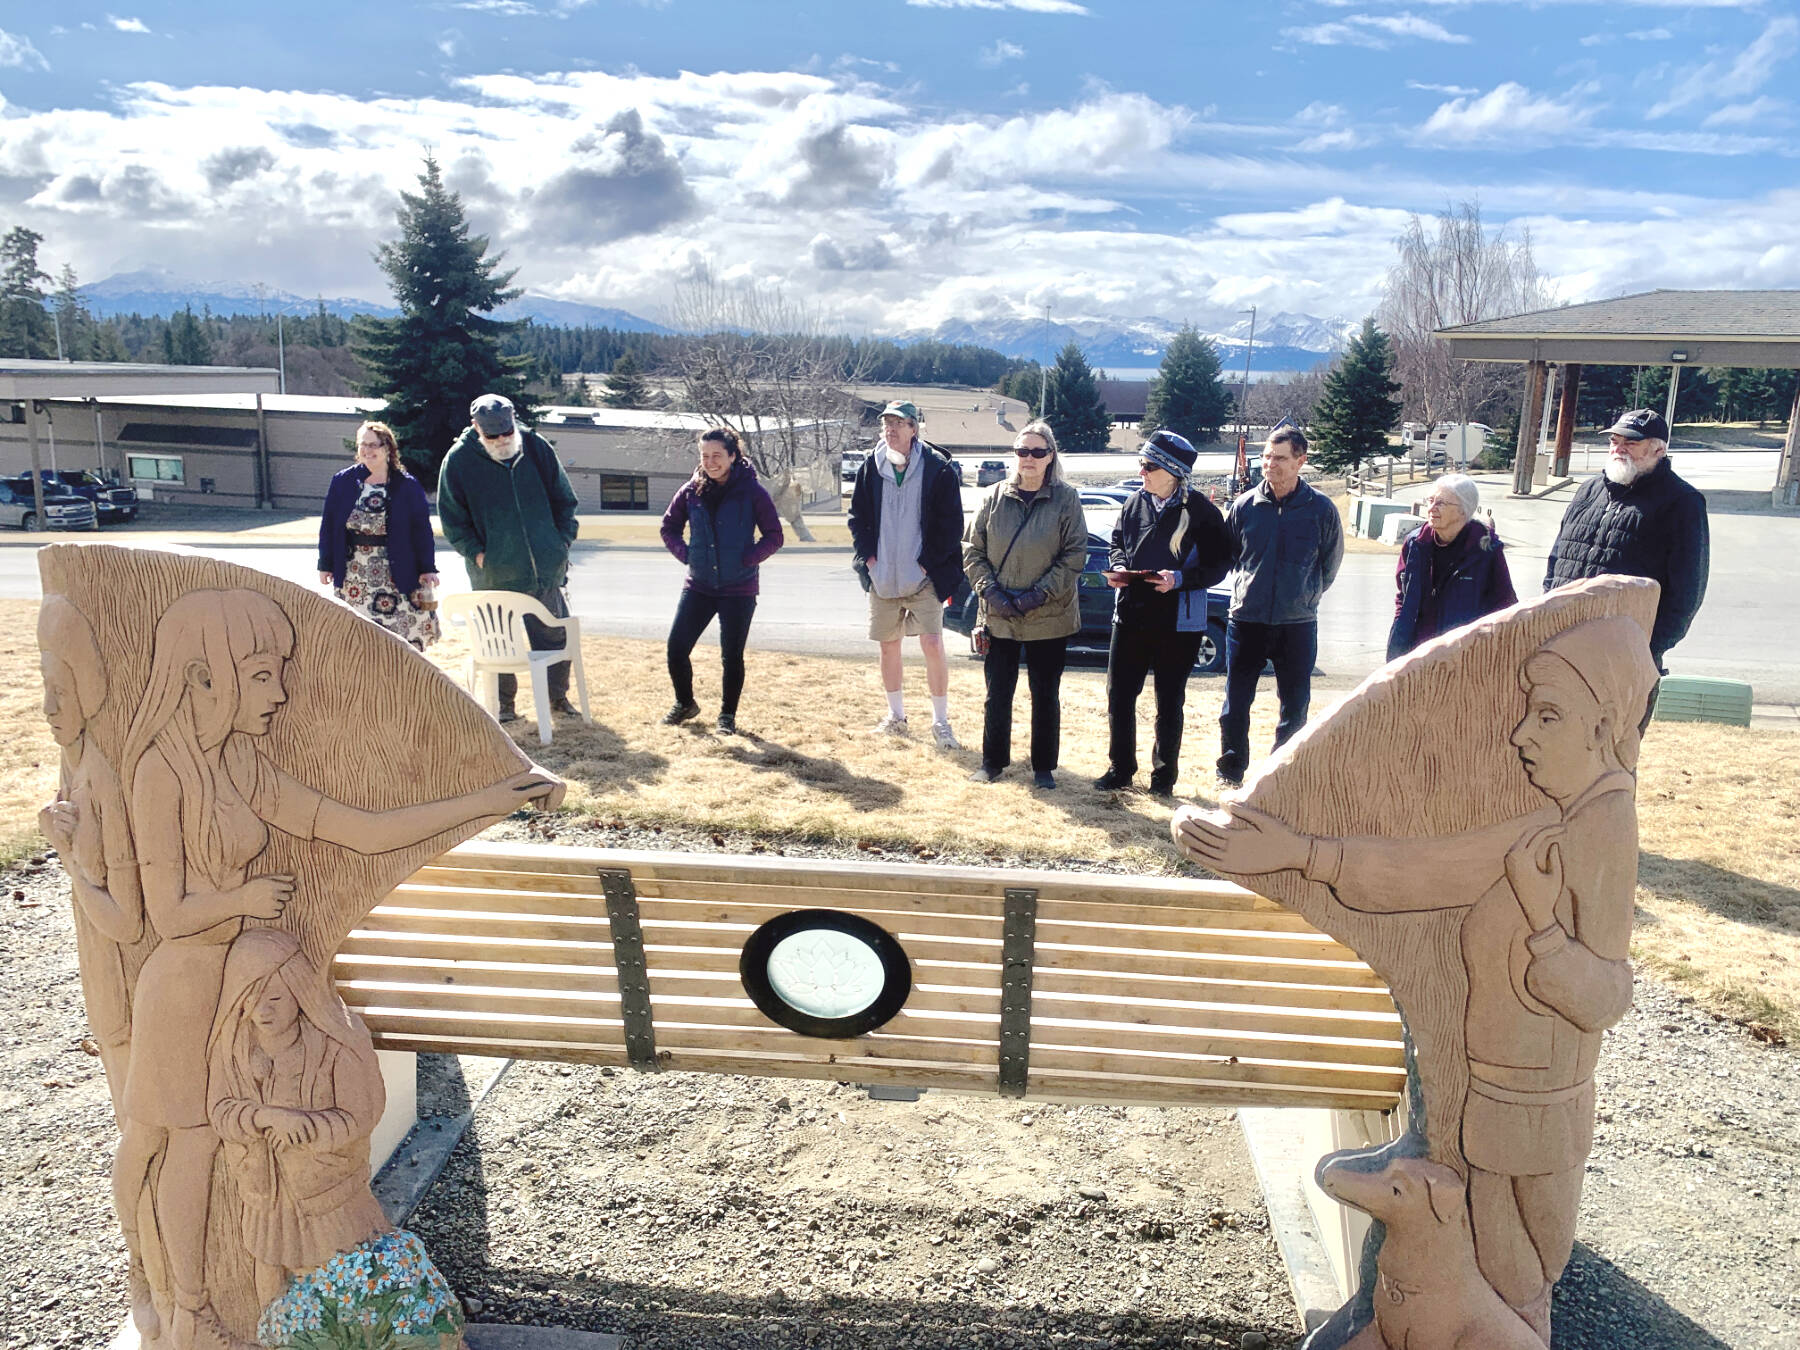 Community members gathered around the Loved and Lost Memorial Bench in front of the Homer Public Library on Wednesday, April 26 to celebrate the installation of the etched glass and copper lotus lamp envisioned by Brad Hughes and created by Art Koeninger. The ceremony, which honored the memory of Anesha “Duffy” Murnane who went missing on Oct. 17, 2019 as well as other missing and murdered people, began with the reading of a poem, “Holding the Light” by Stuart Kestenbaum, then continued with words shared by Murnane’s parents, friends and the artists, and ended with a blessing. The bench was dedicated in a memorial on June 12, 2022, and with the installation of the lamp and the information plaque inside the library’s front doors, the Loved and Lost Memorial Bench is now complete. Photo by Christina Whiting